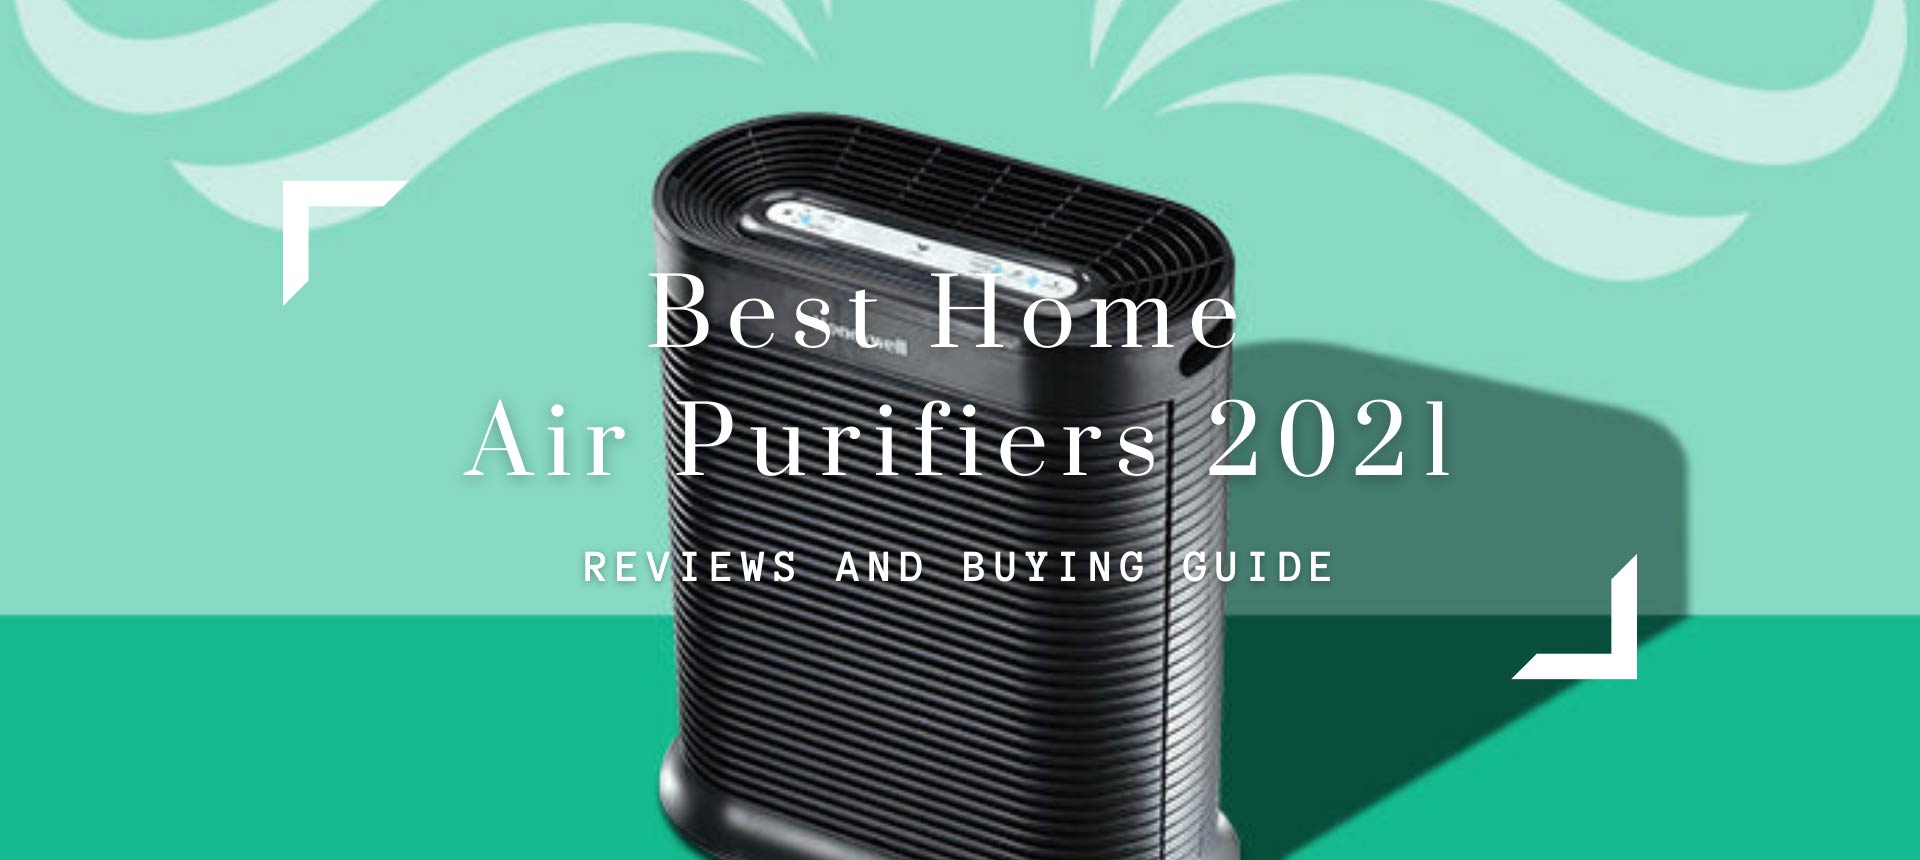 Best Home Air Purifiers 2021 Review